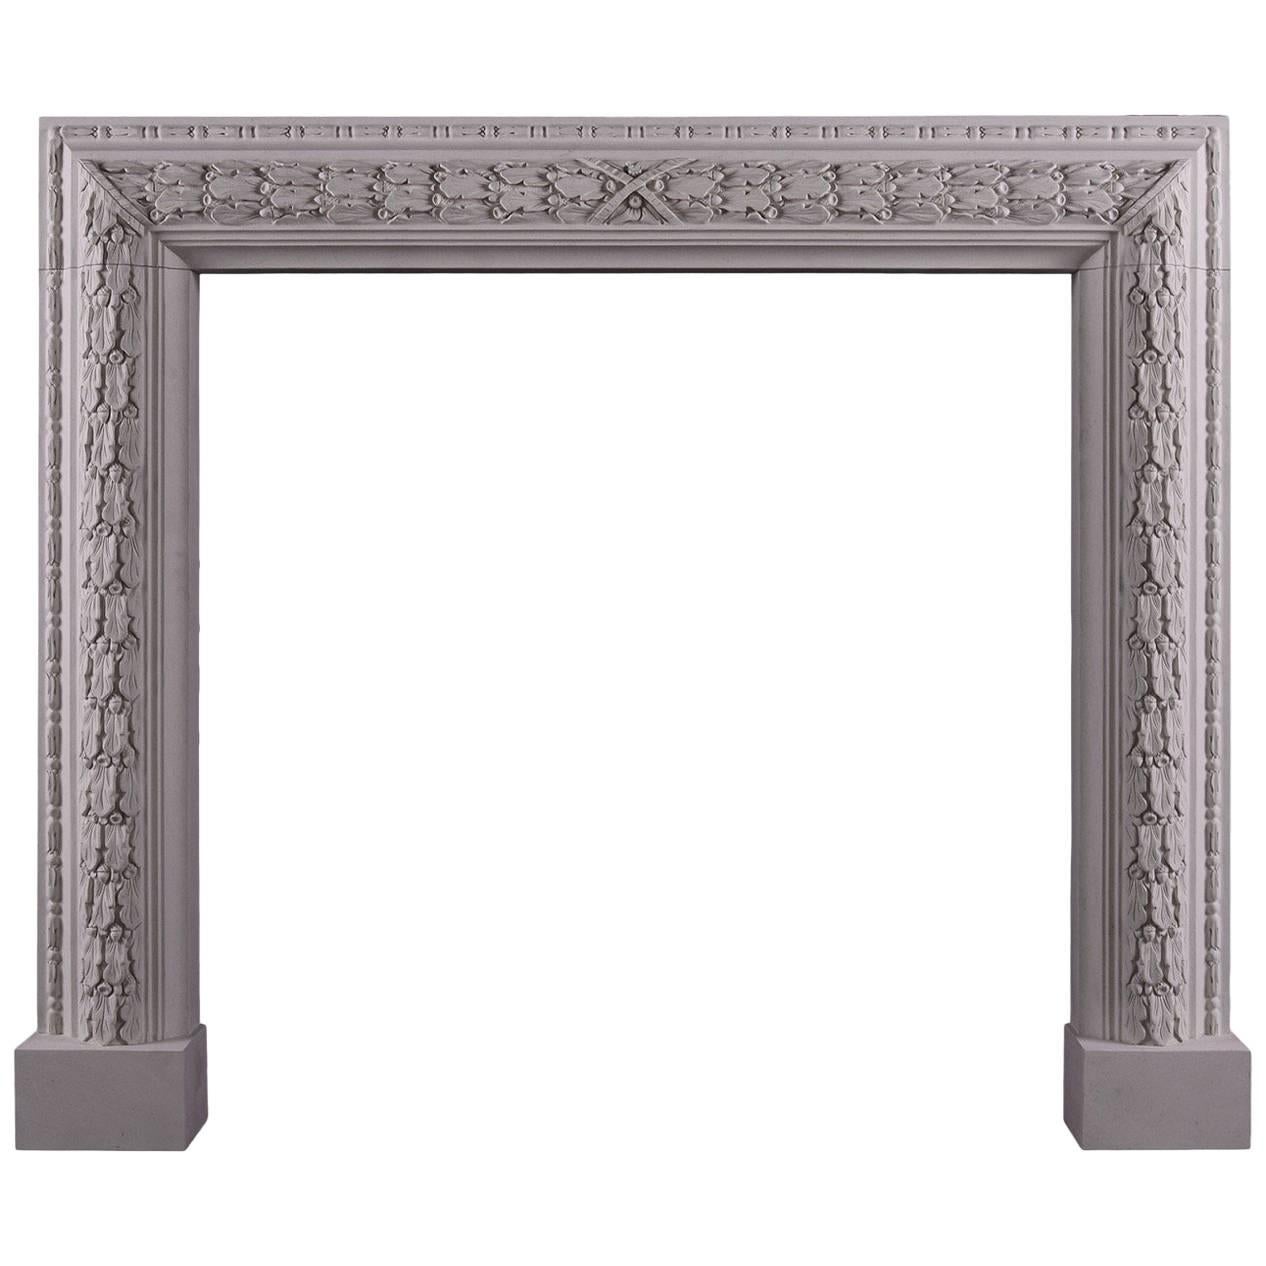 Elegant Carved Bolection Fireplace in Limestone